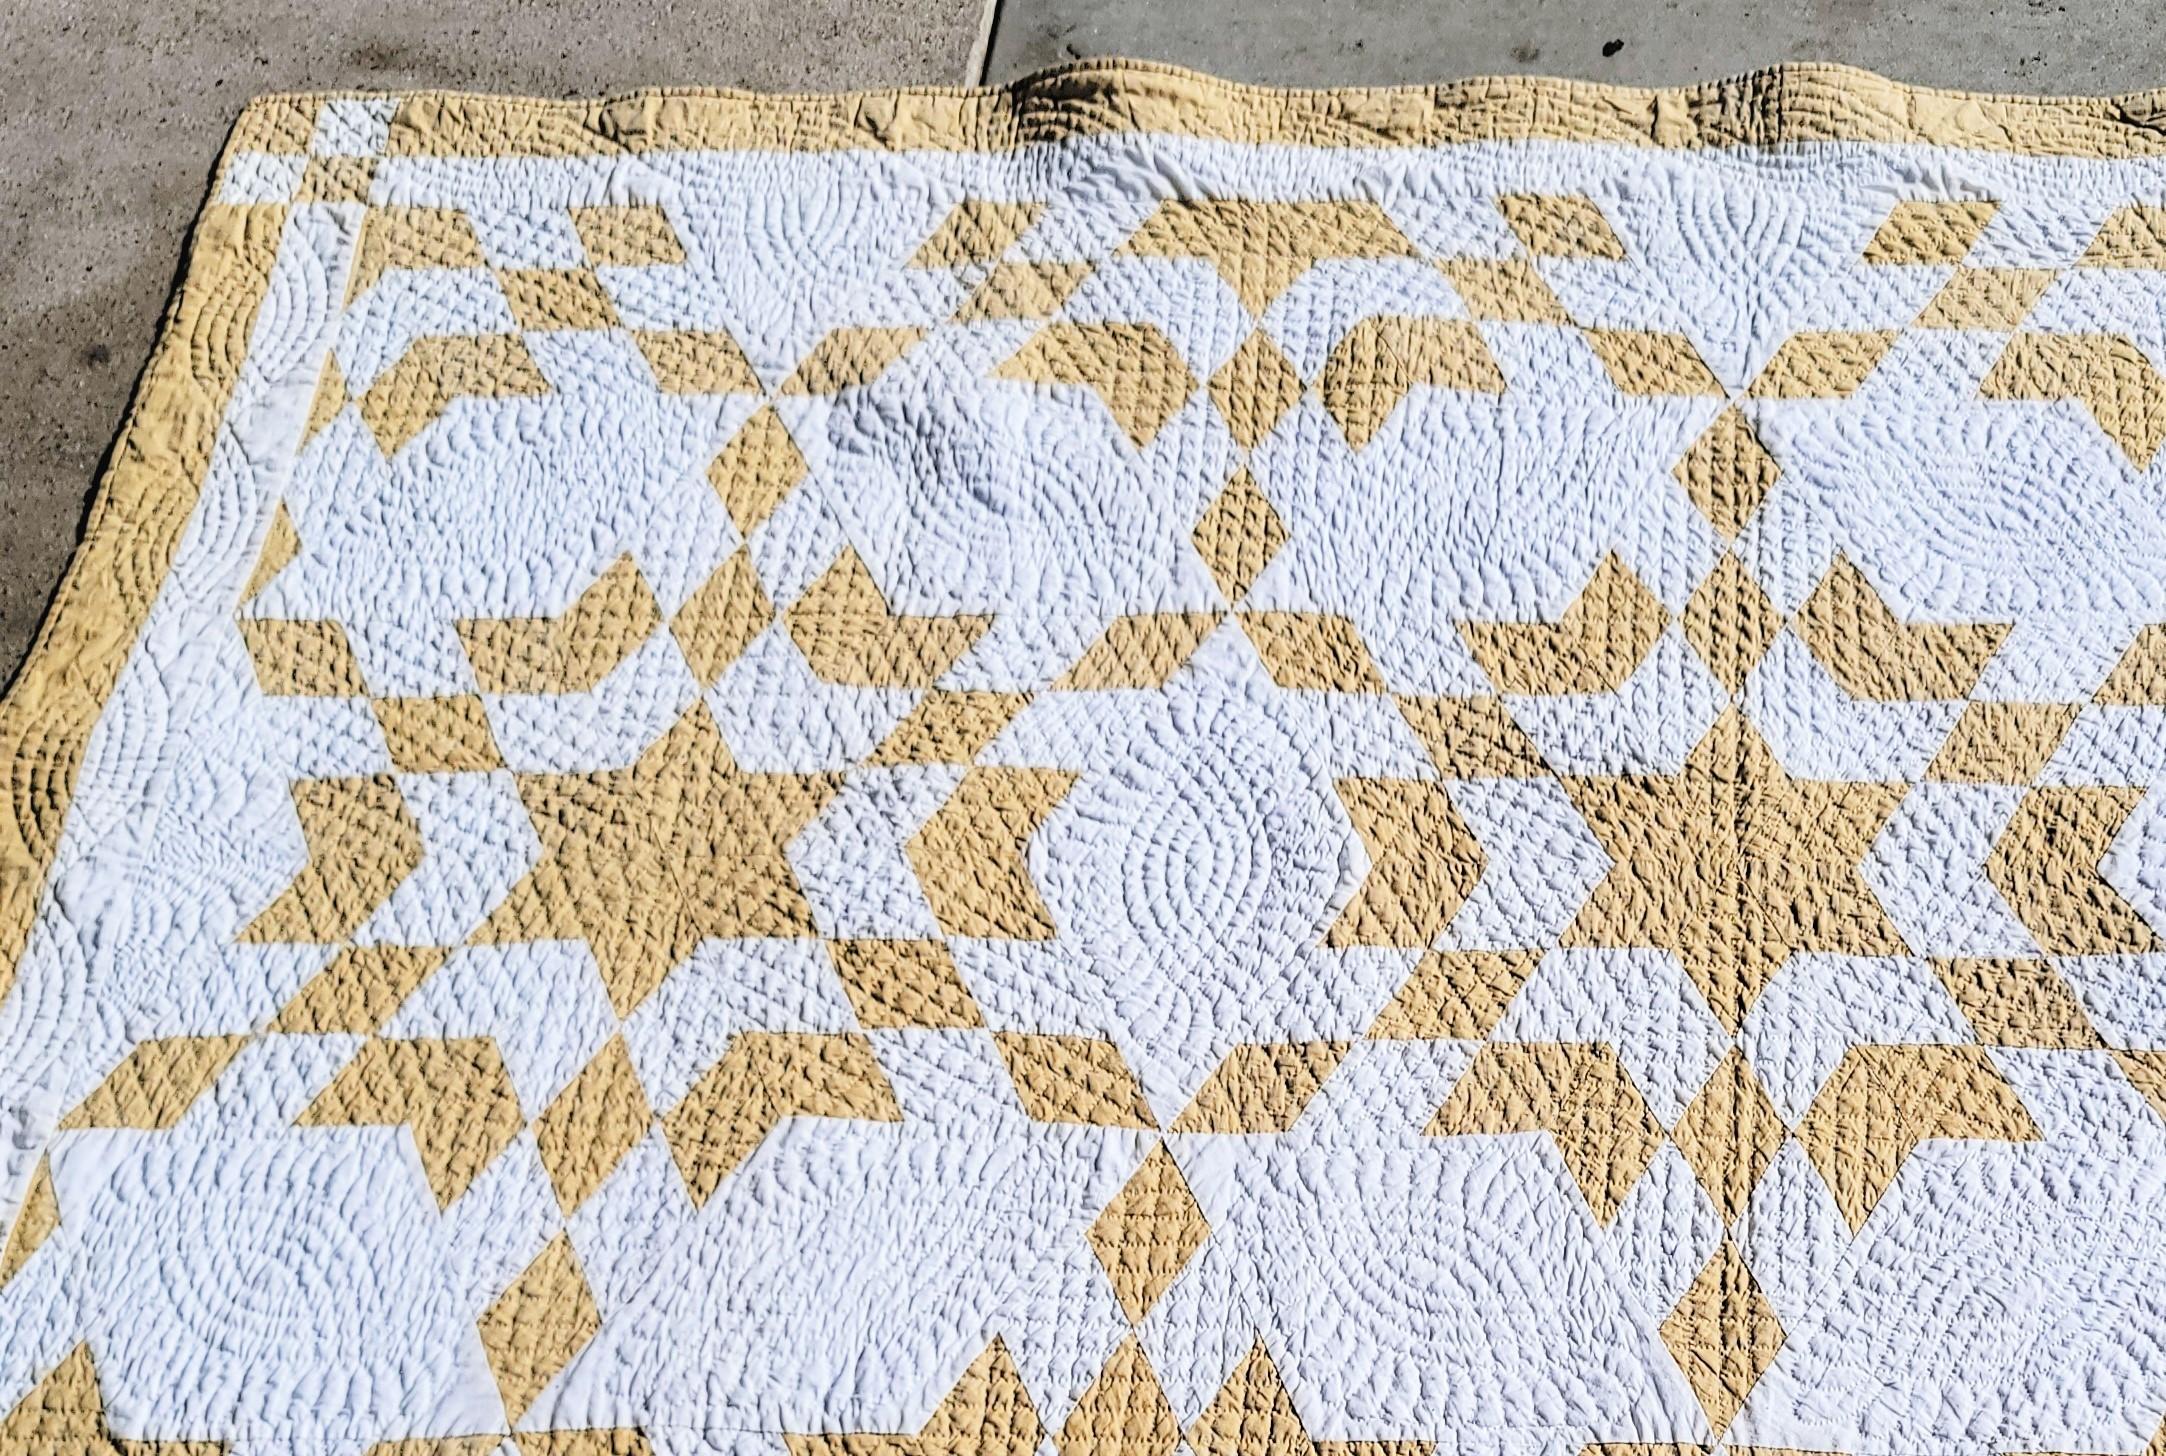 19Thc Tan & white geometric star quilt from Pennsylvania in fine condition. This quilt has very fine quilting and nice piecework.